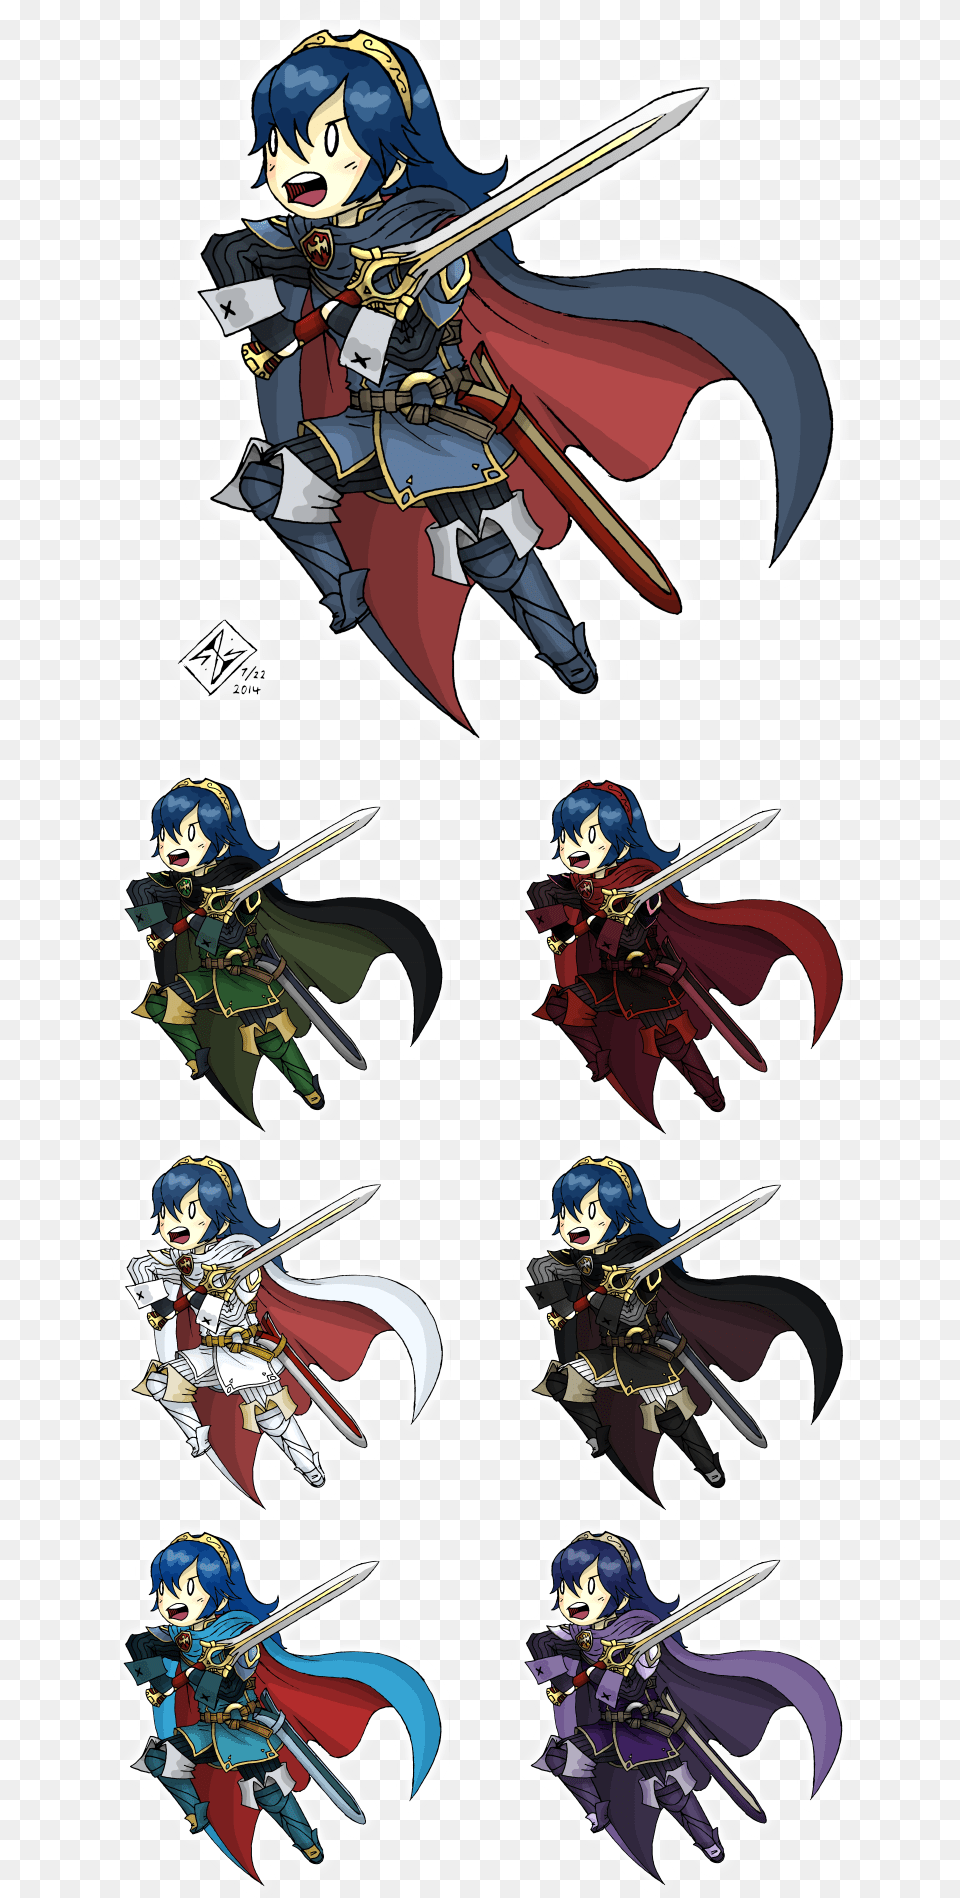 So I Drew A Somewhat Stylized Lucina And Then Did Cartoon, Publication, Book, Comics, Baby Png